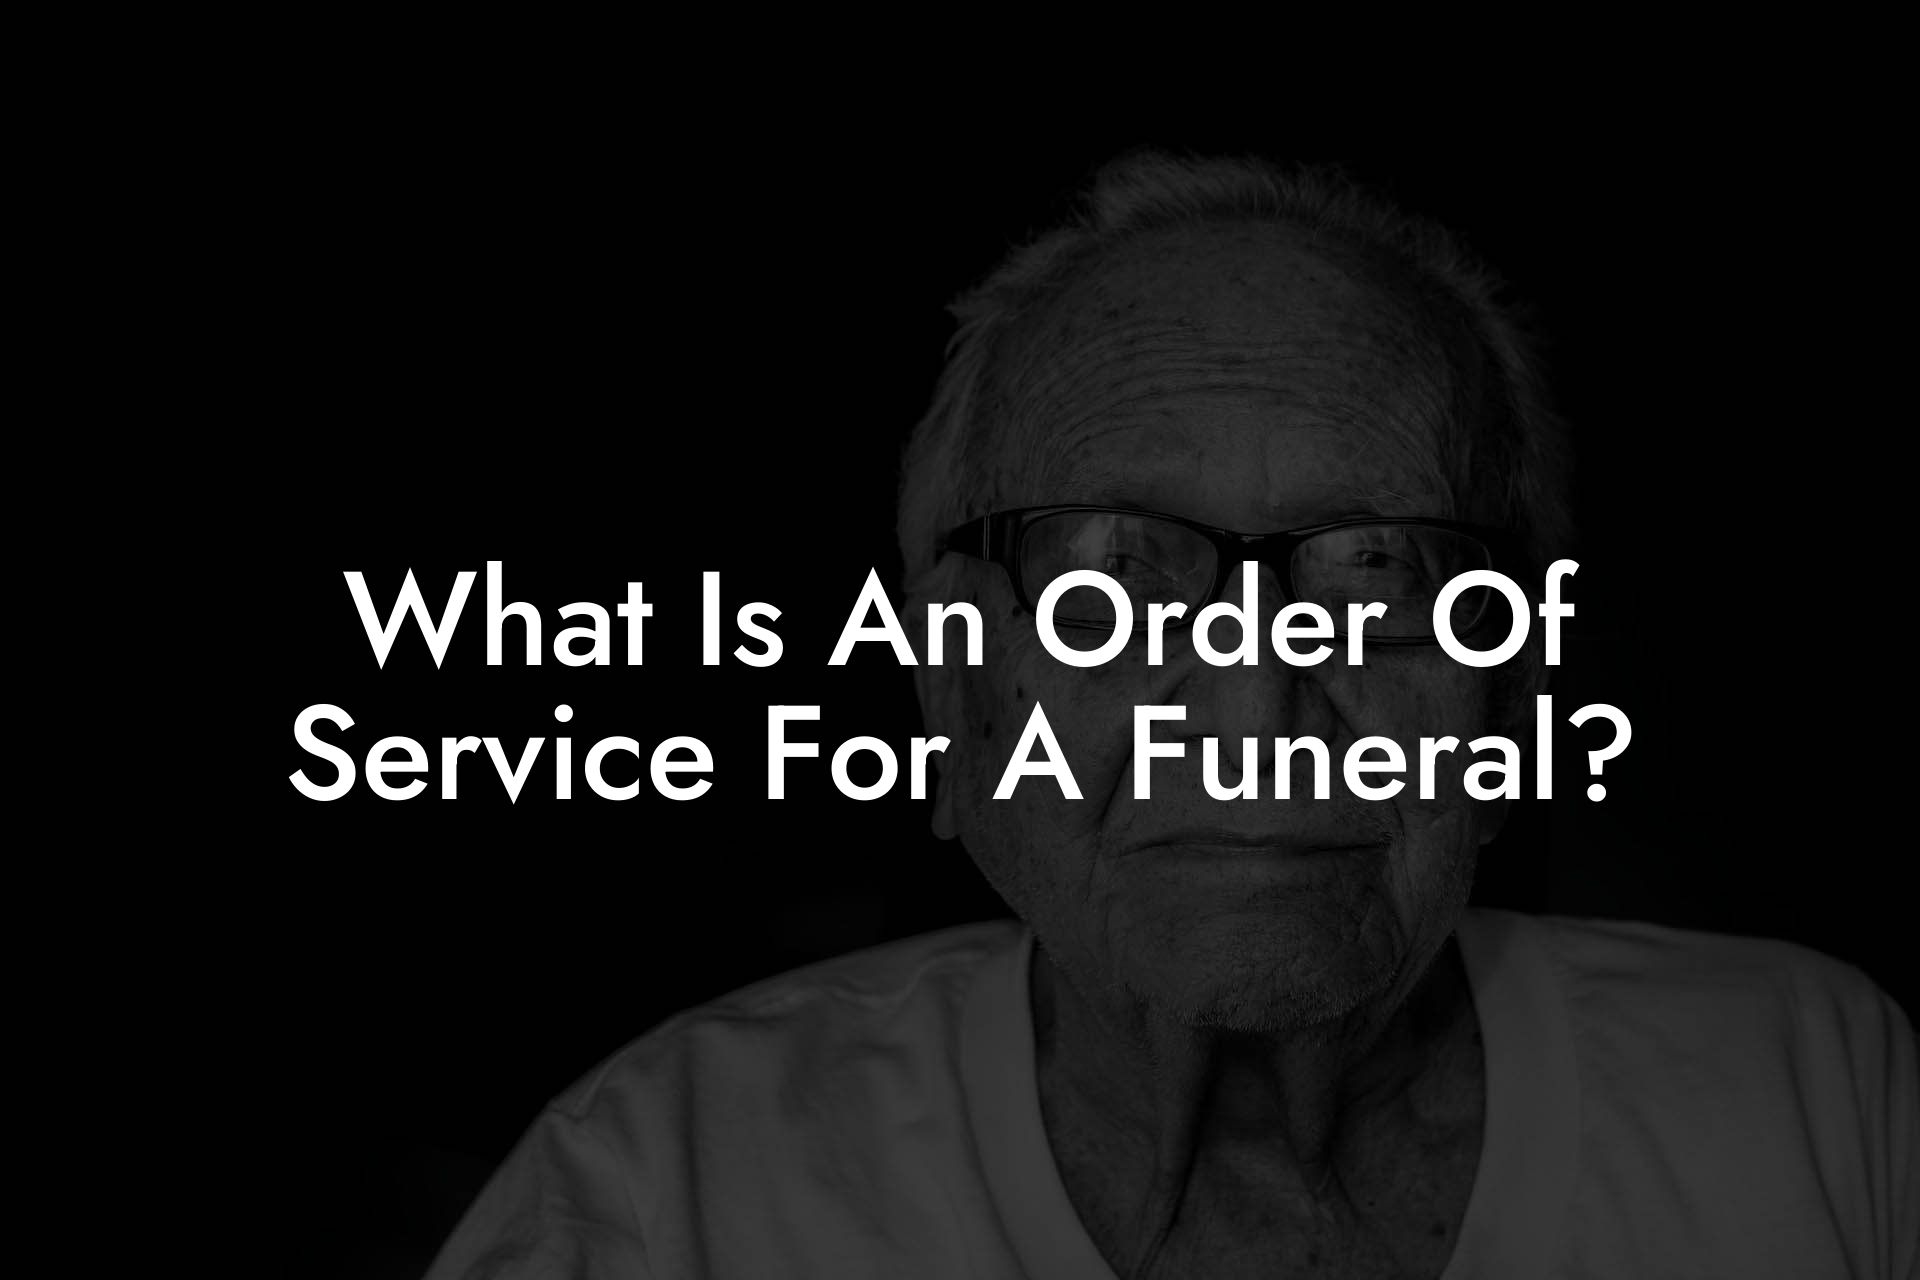 What Is An Order Of Service For A Funeral?